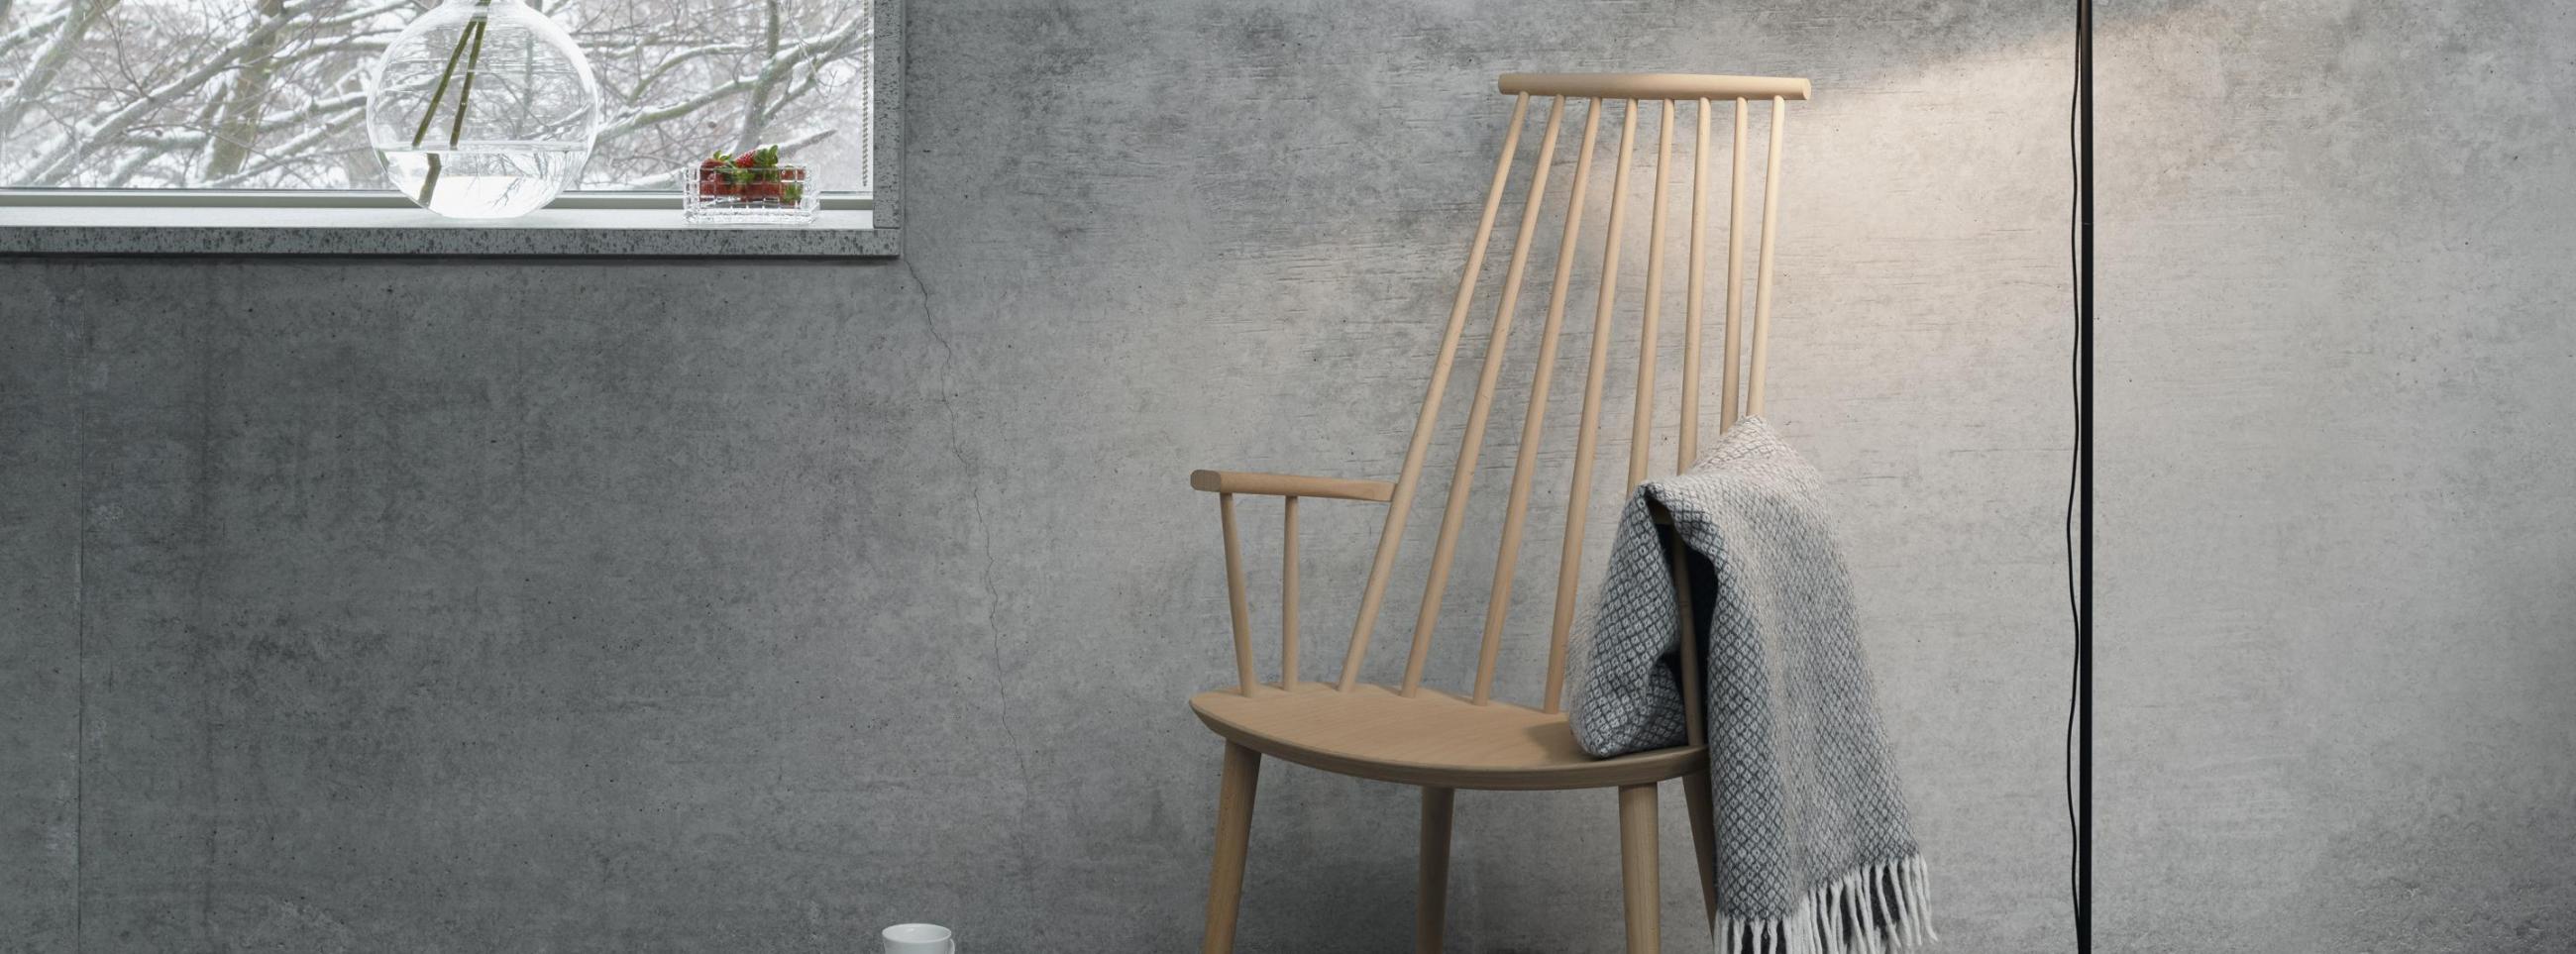 Grey room with rocking chair, blanket and a floor lamp